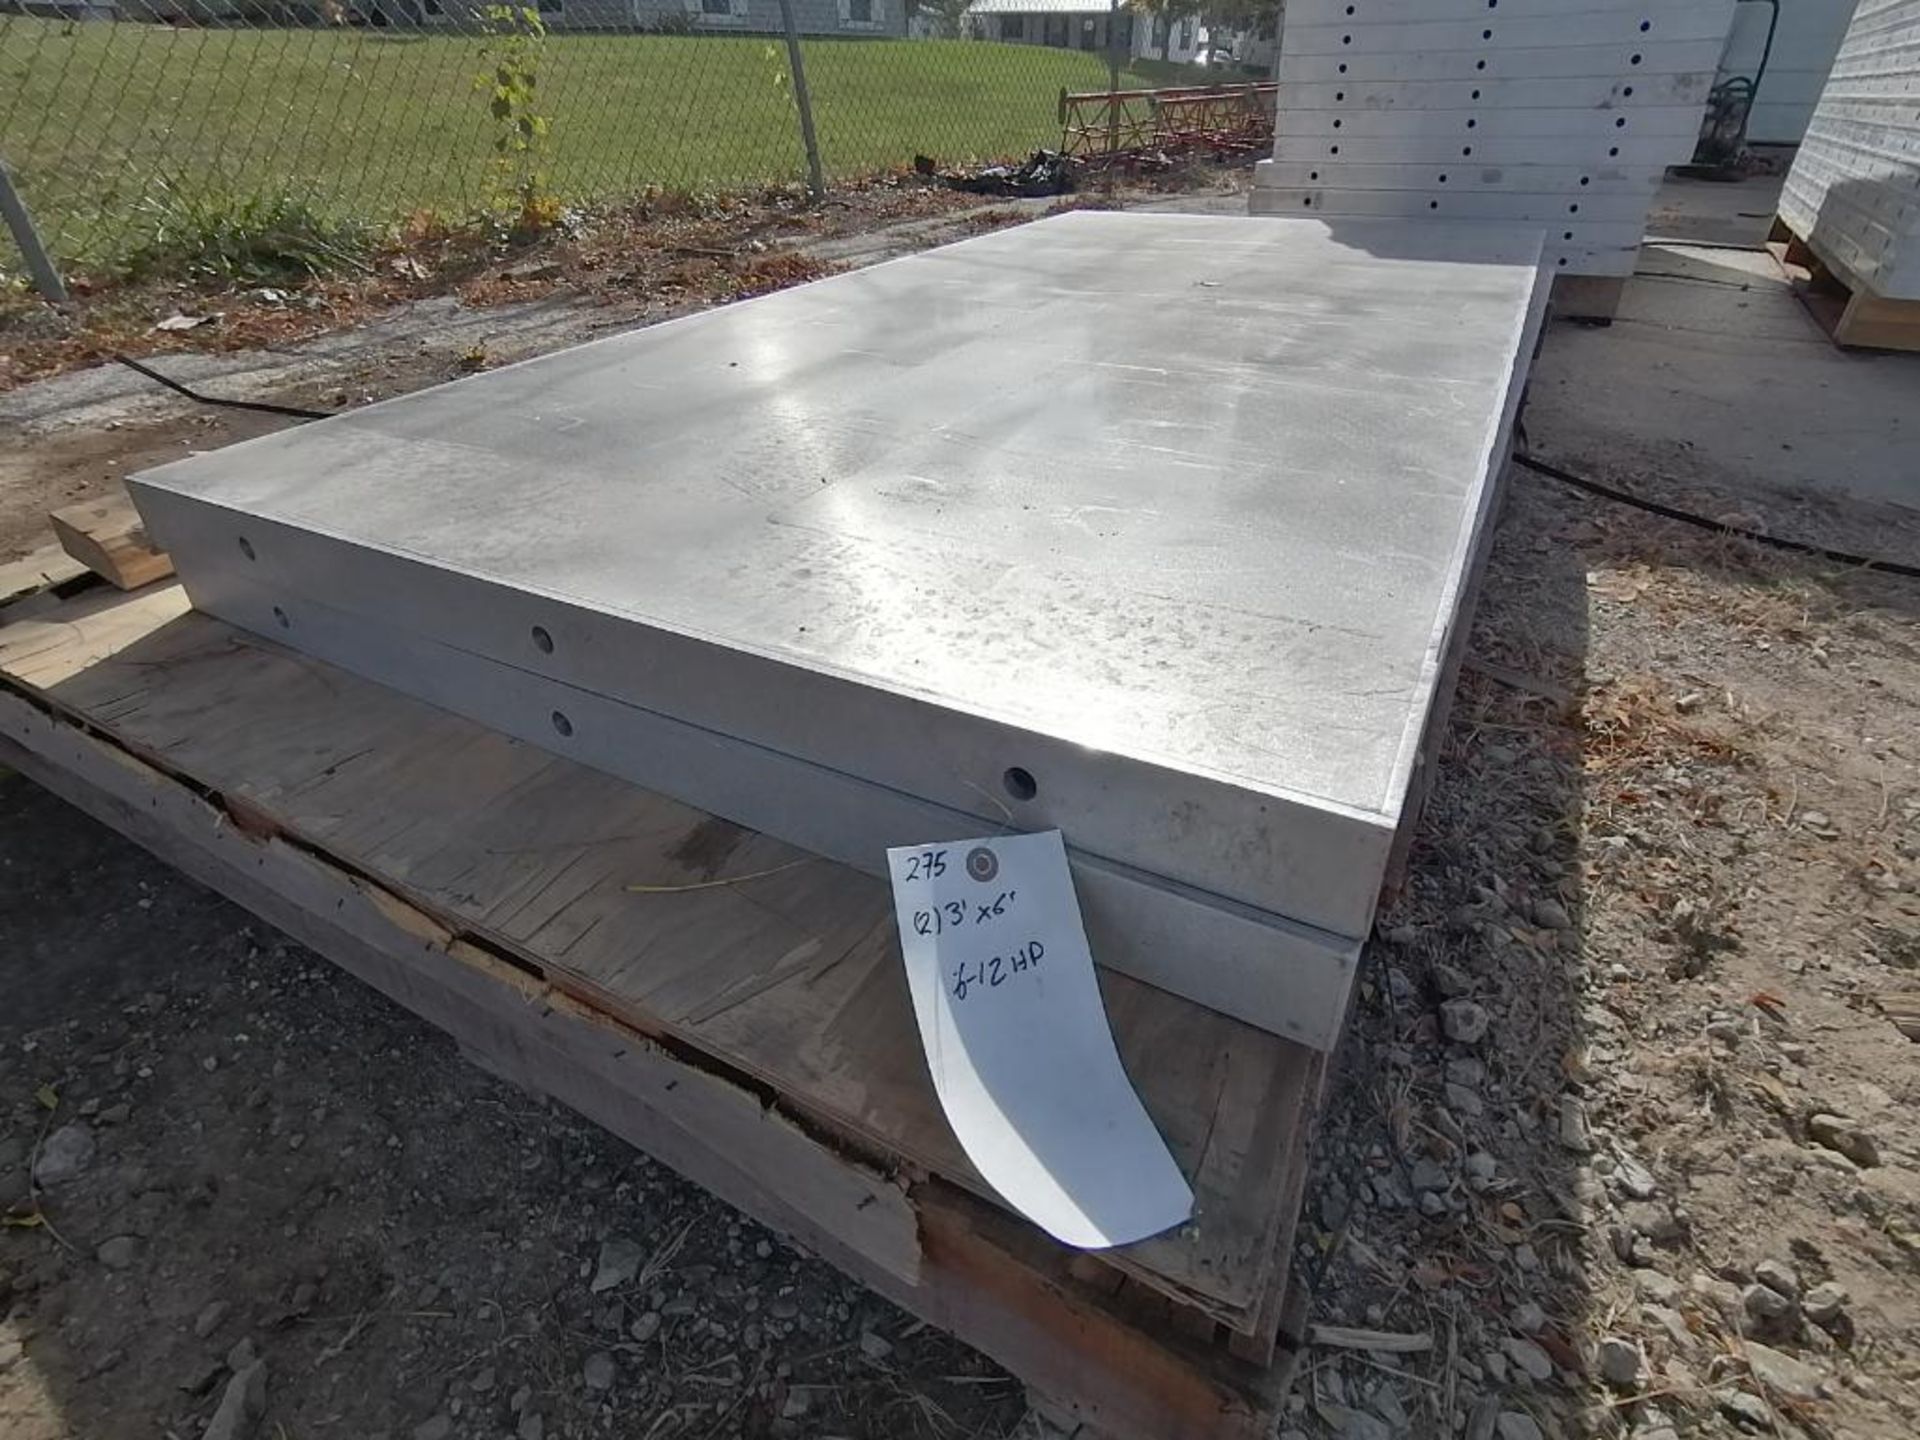 (2) 36" x 6' NEW Badger Smooth Aluminum Concrete Forms 6-12 Hole Pattern. Located in Mt. Pleasant,